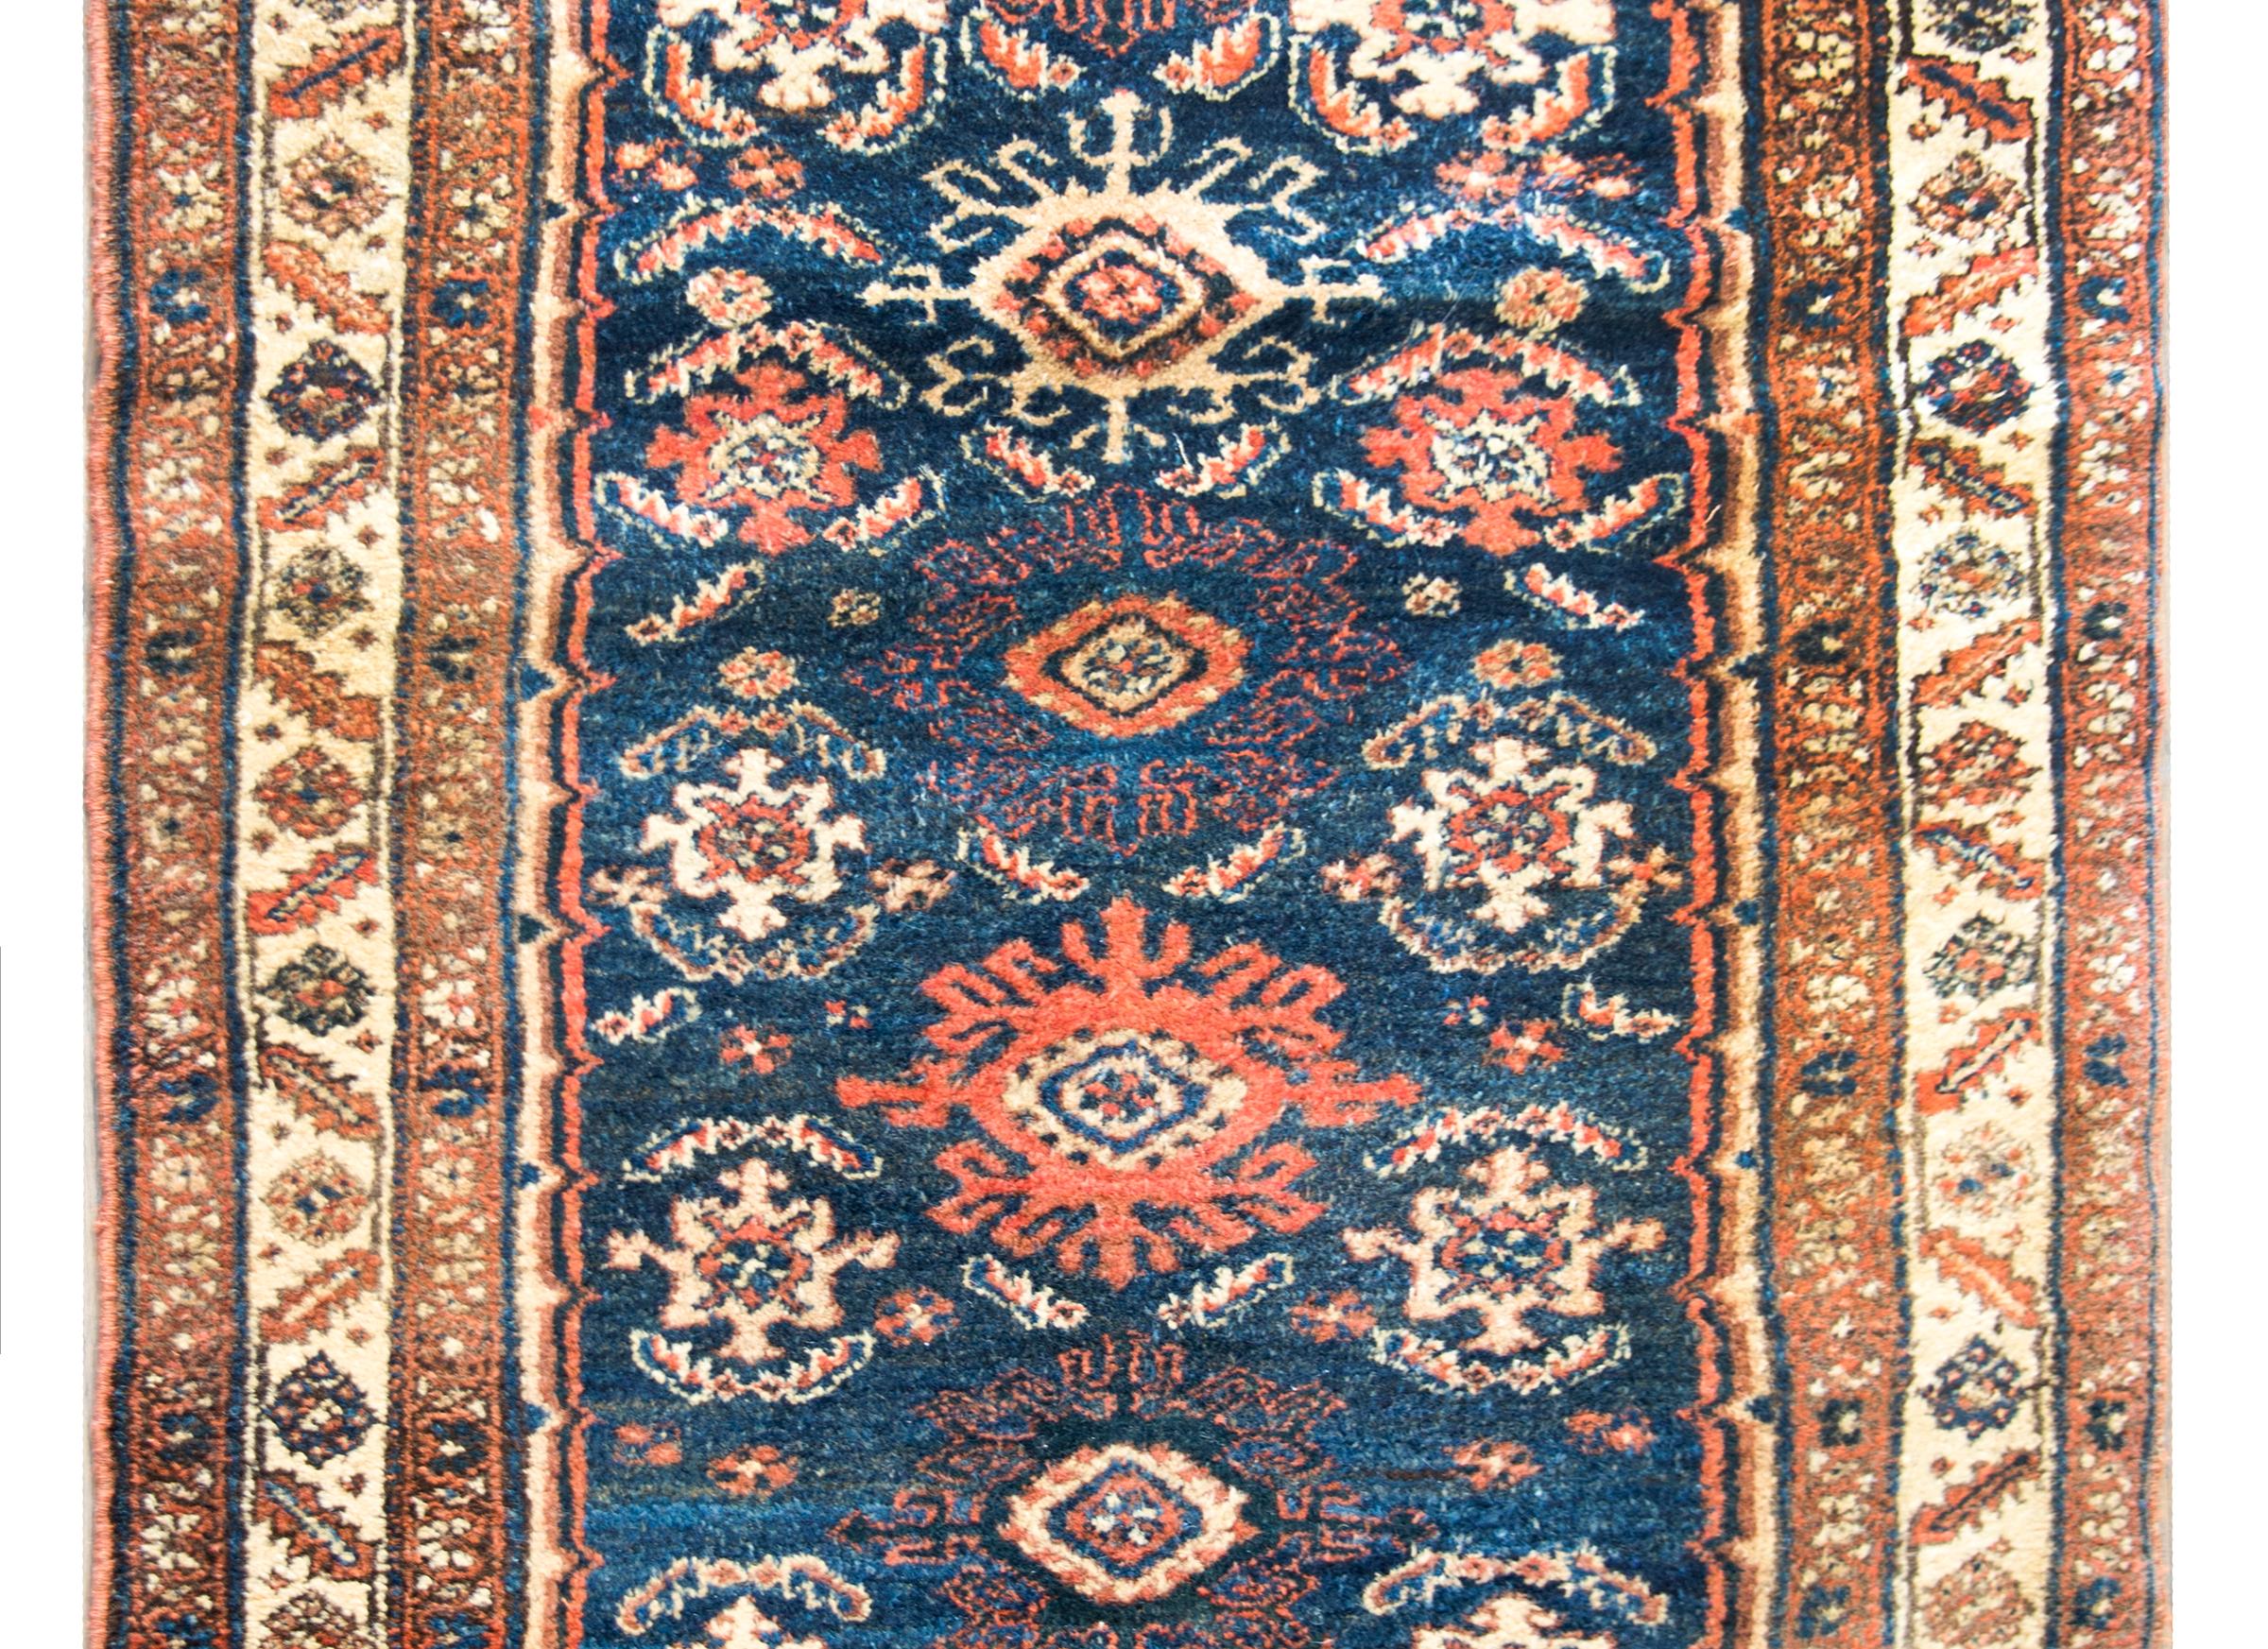 A stunning early 20th century Persian Hamadan rug with a beautiful all-over stylized floral pattern woven in crimson, indigo, cream, and gold, and set against a dark indigo background. The border is complex with multiple petite floral patterned